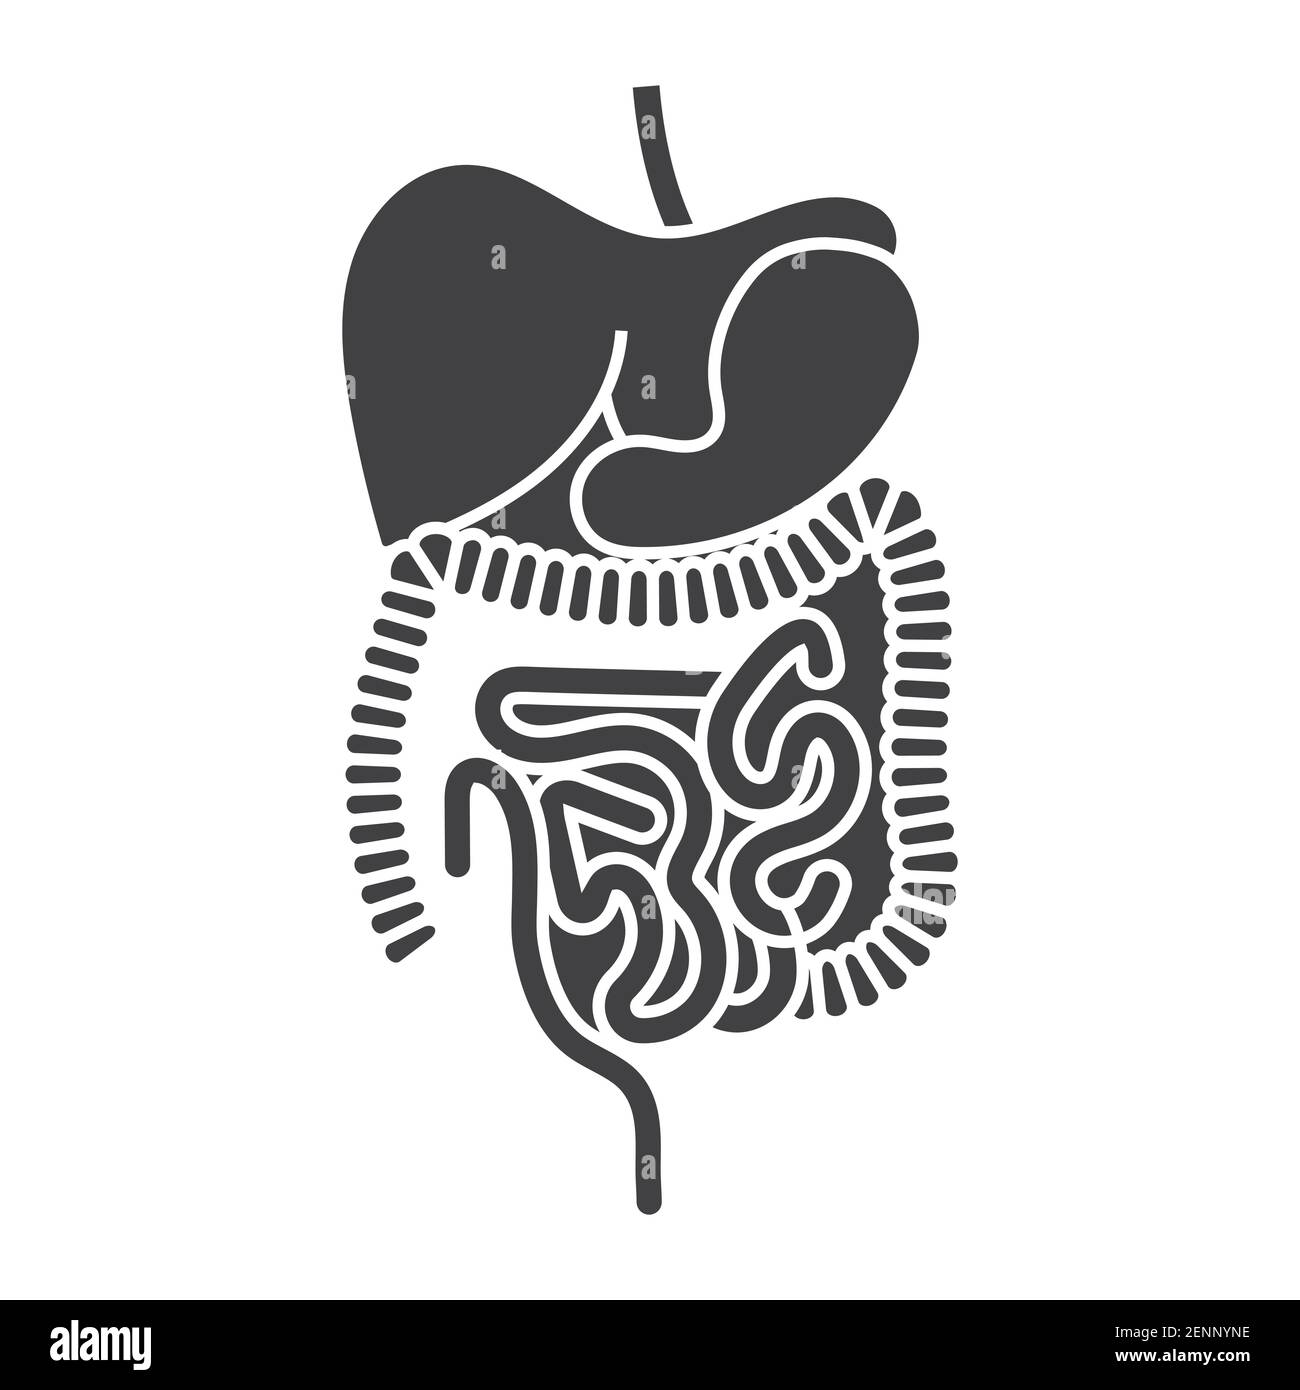 Human digestive system organs flat vector icon for apps and websites Stock Vector